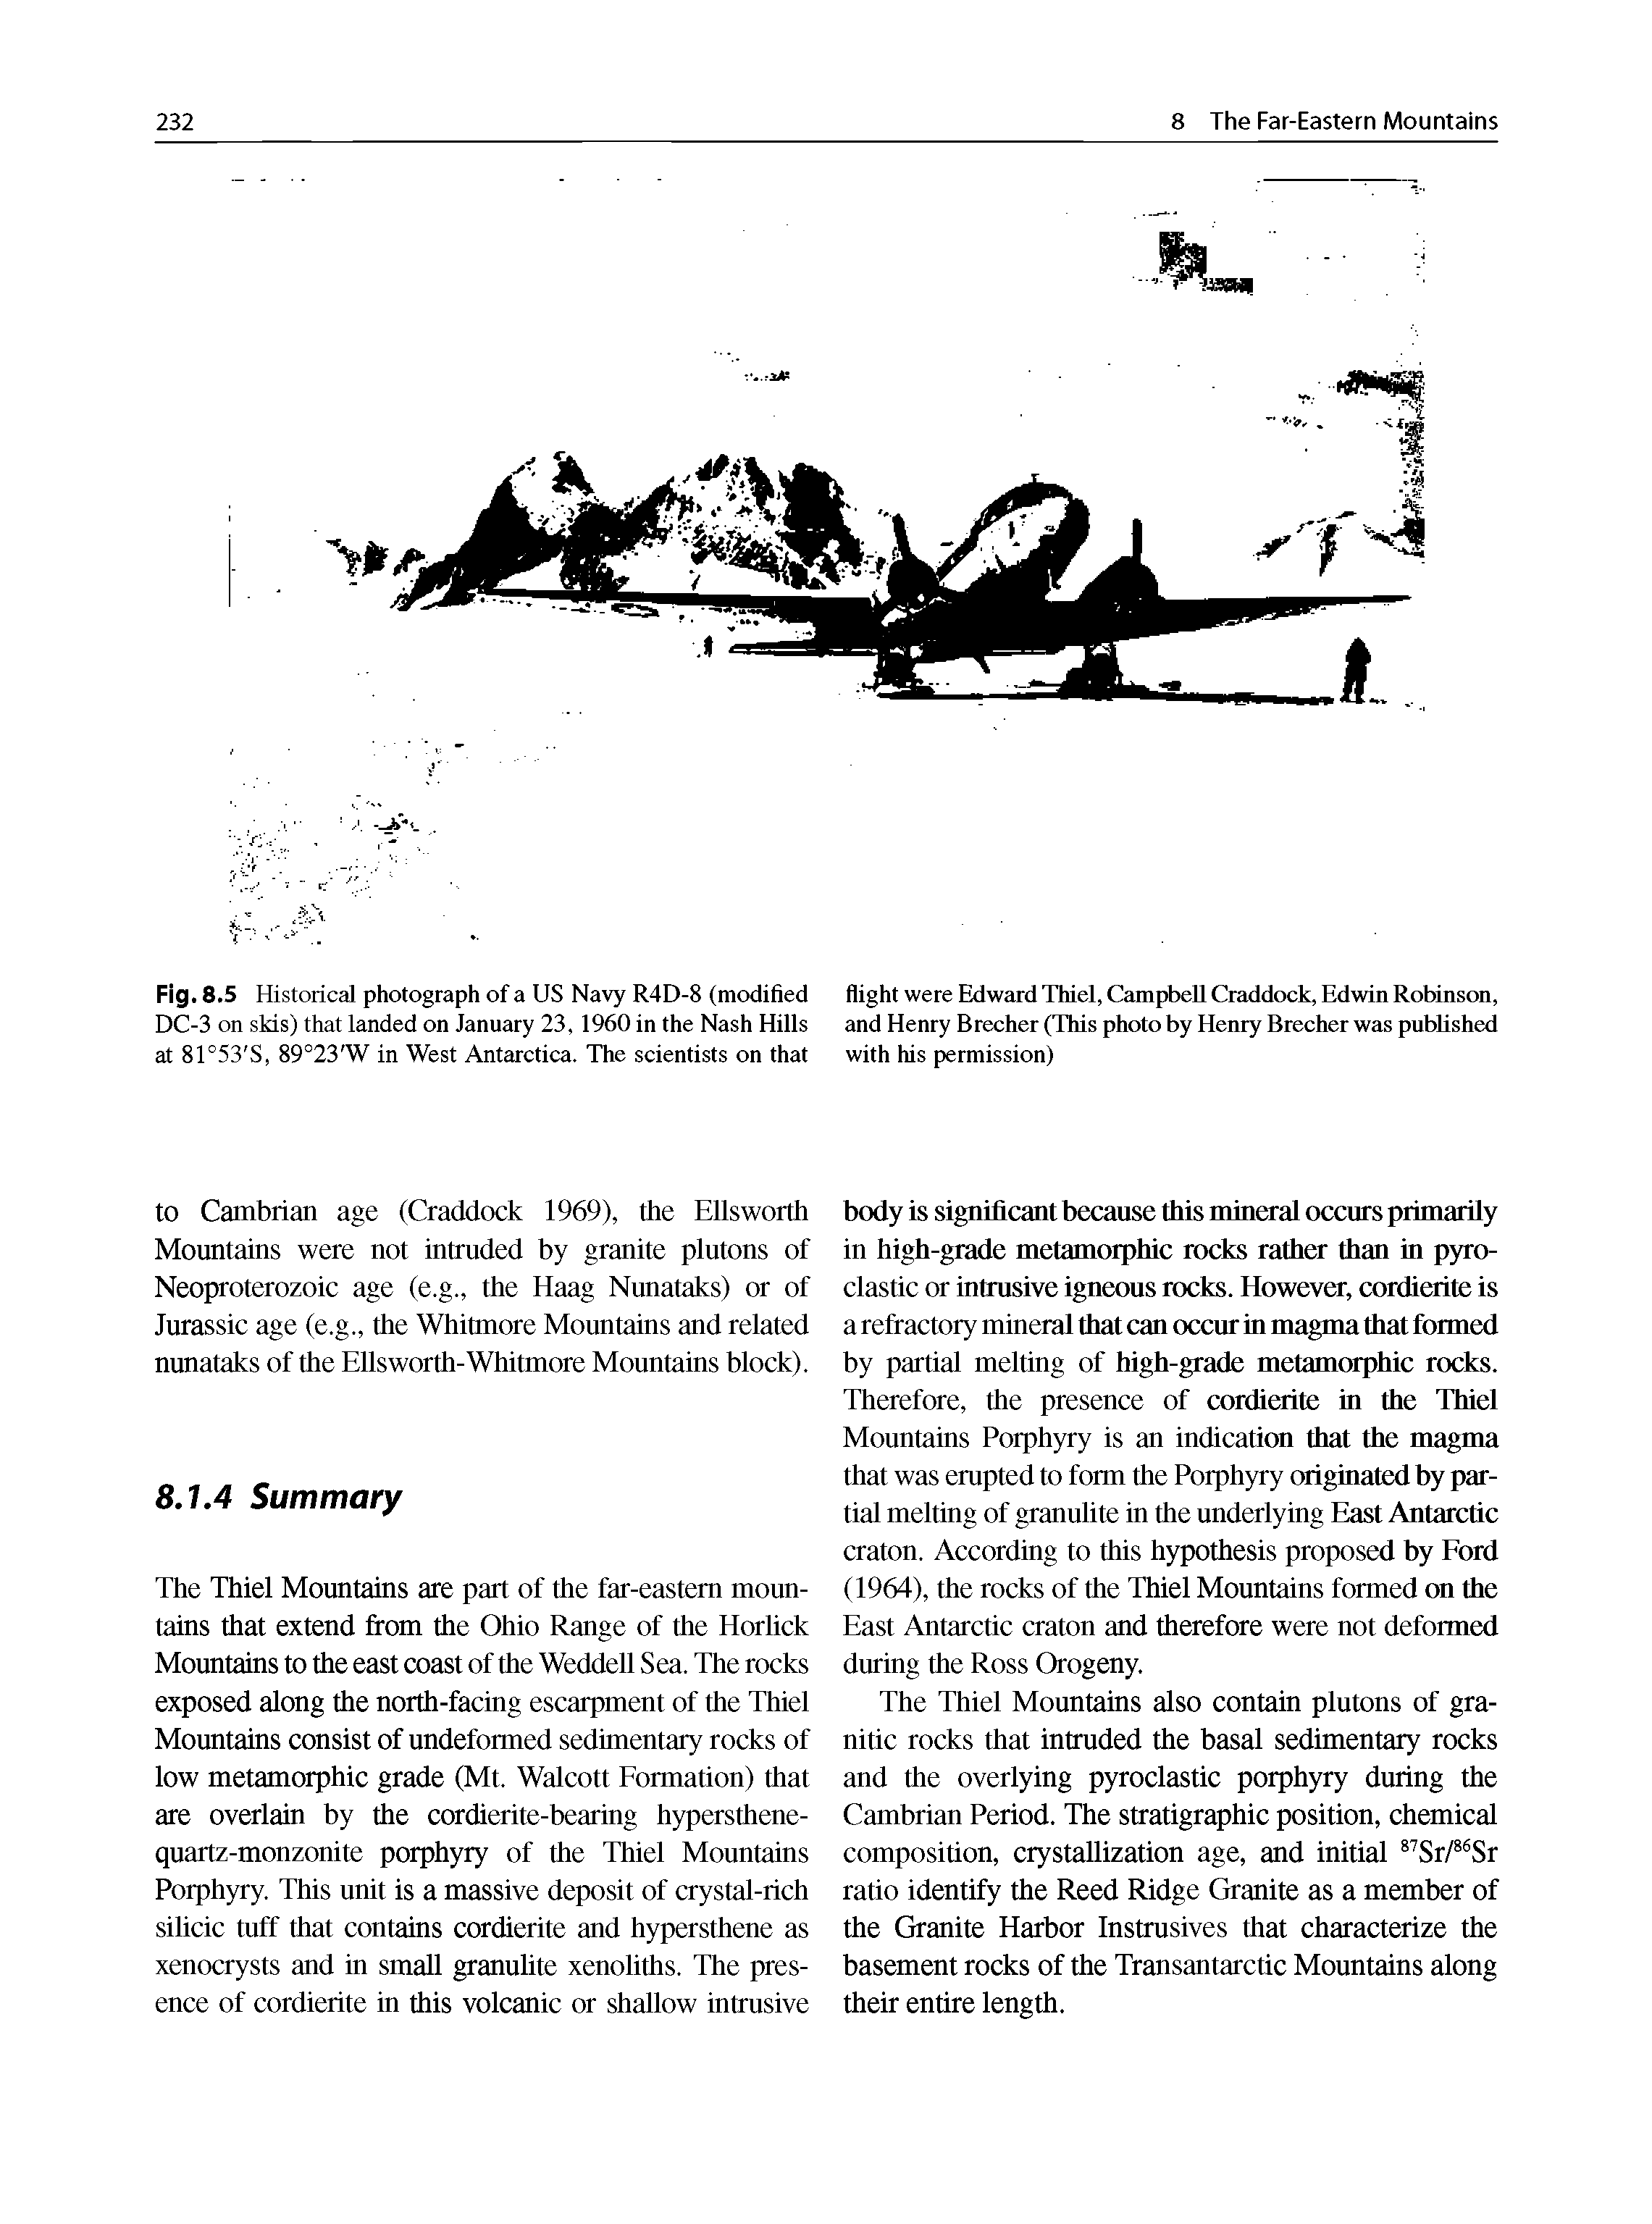 Fig. 8.5 Historical photograph of a US Navy R4D-8 (modified DC-3 on skis) that landed on Janutiry 23,1960 in the Nash Hills at 81°53 S, 89°23 W in West Antarctica. The scientists on that...